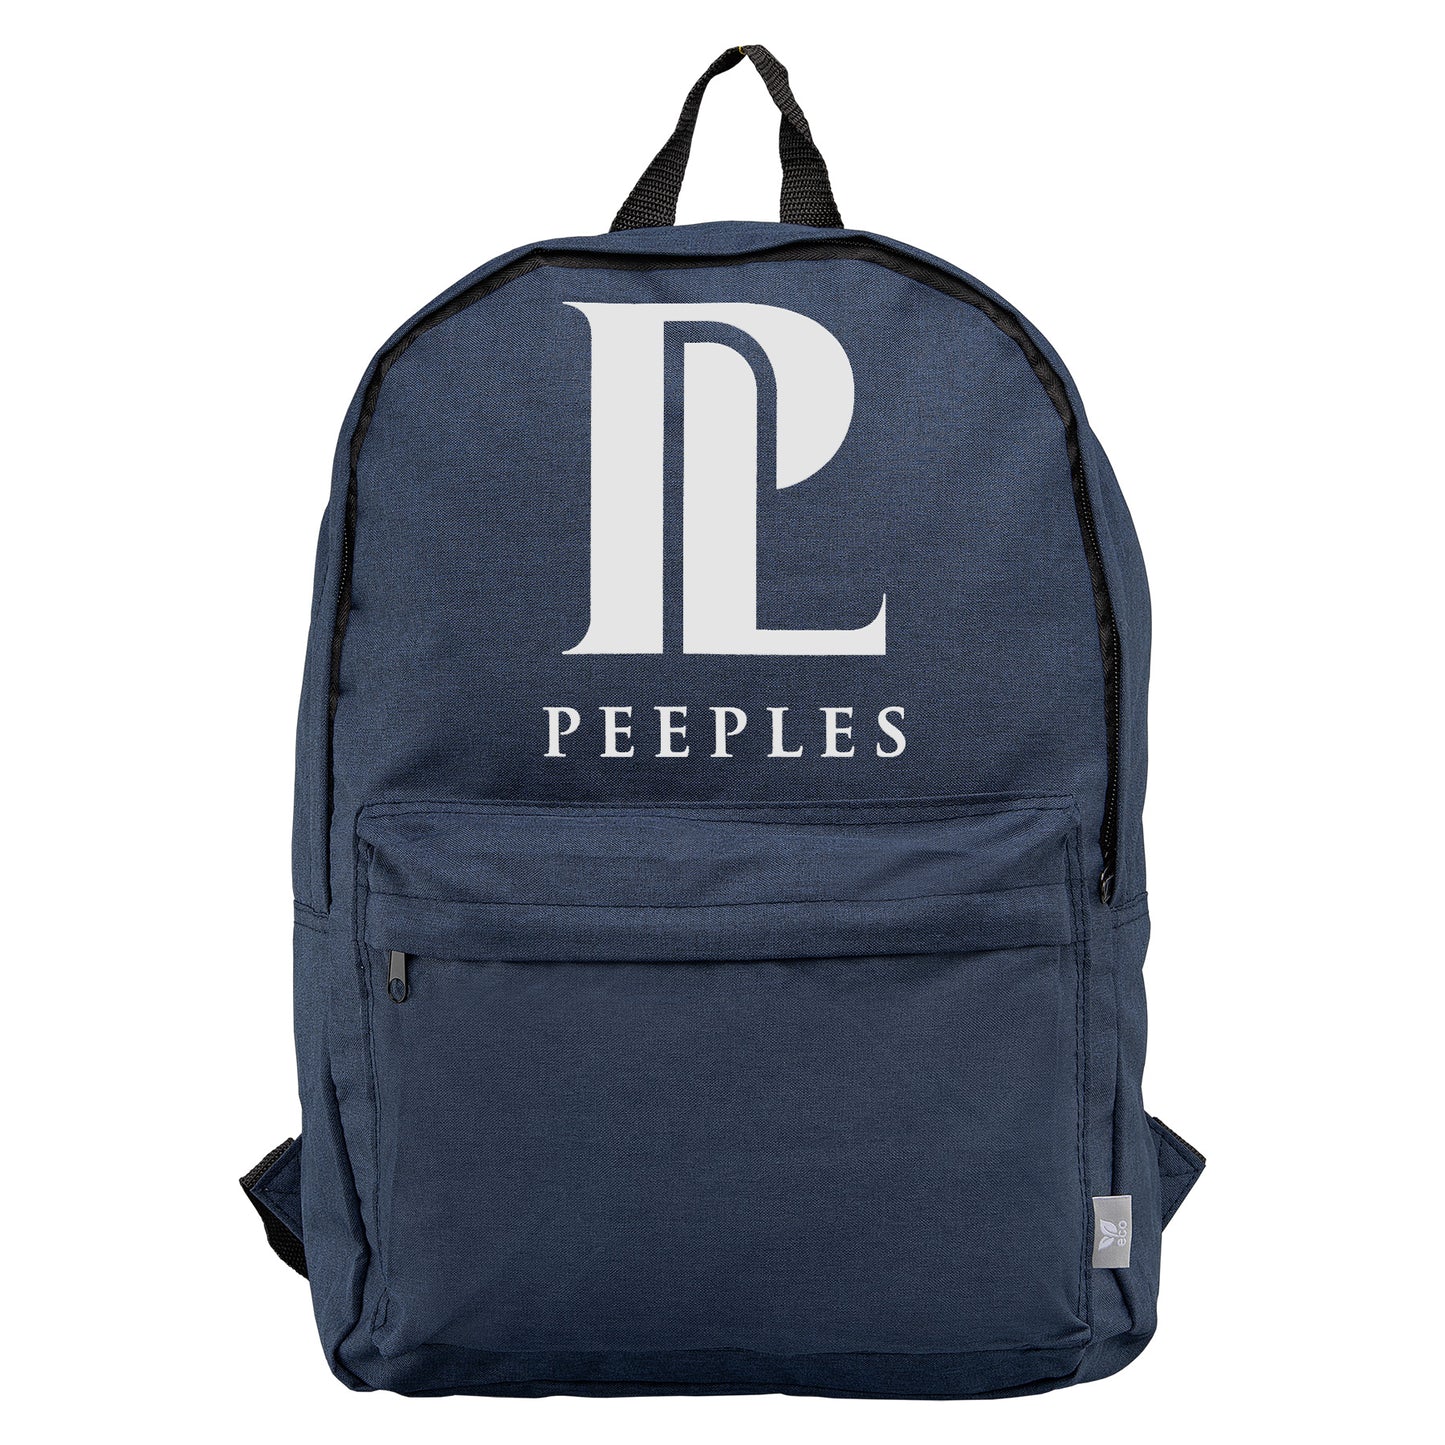 Glasgow Canvas Backpack